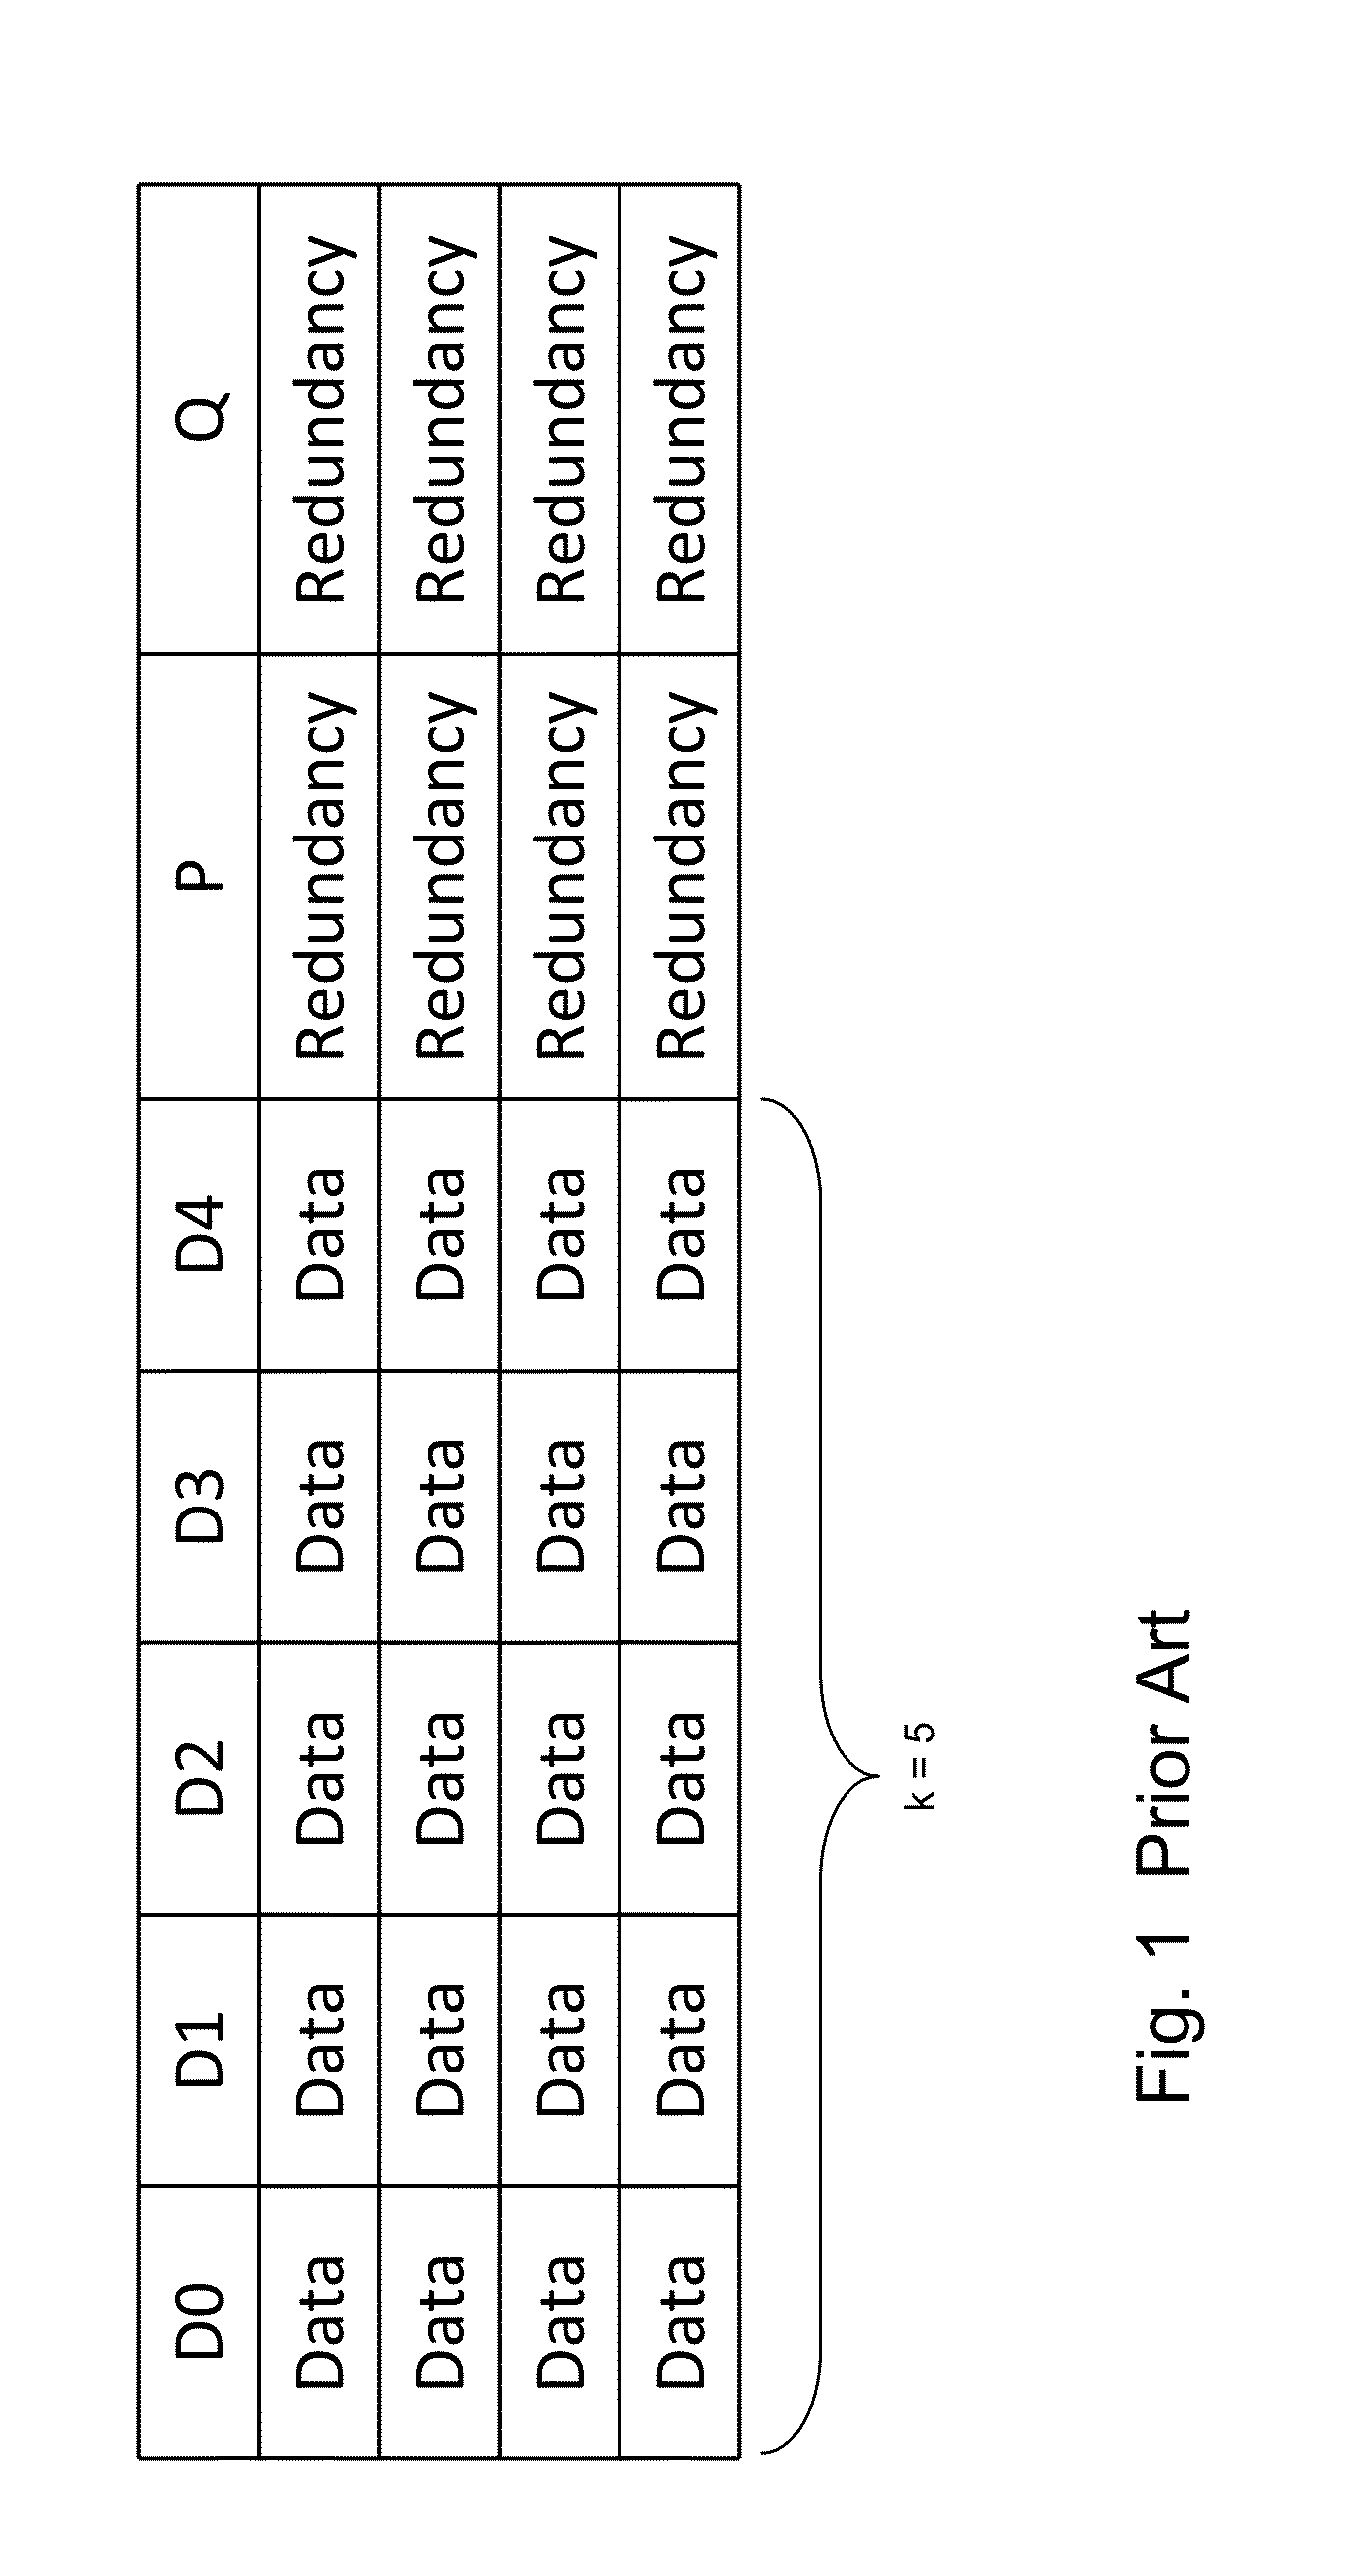 Secure data storage in raid memory devices